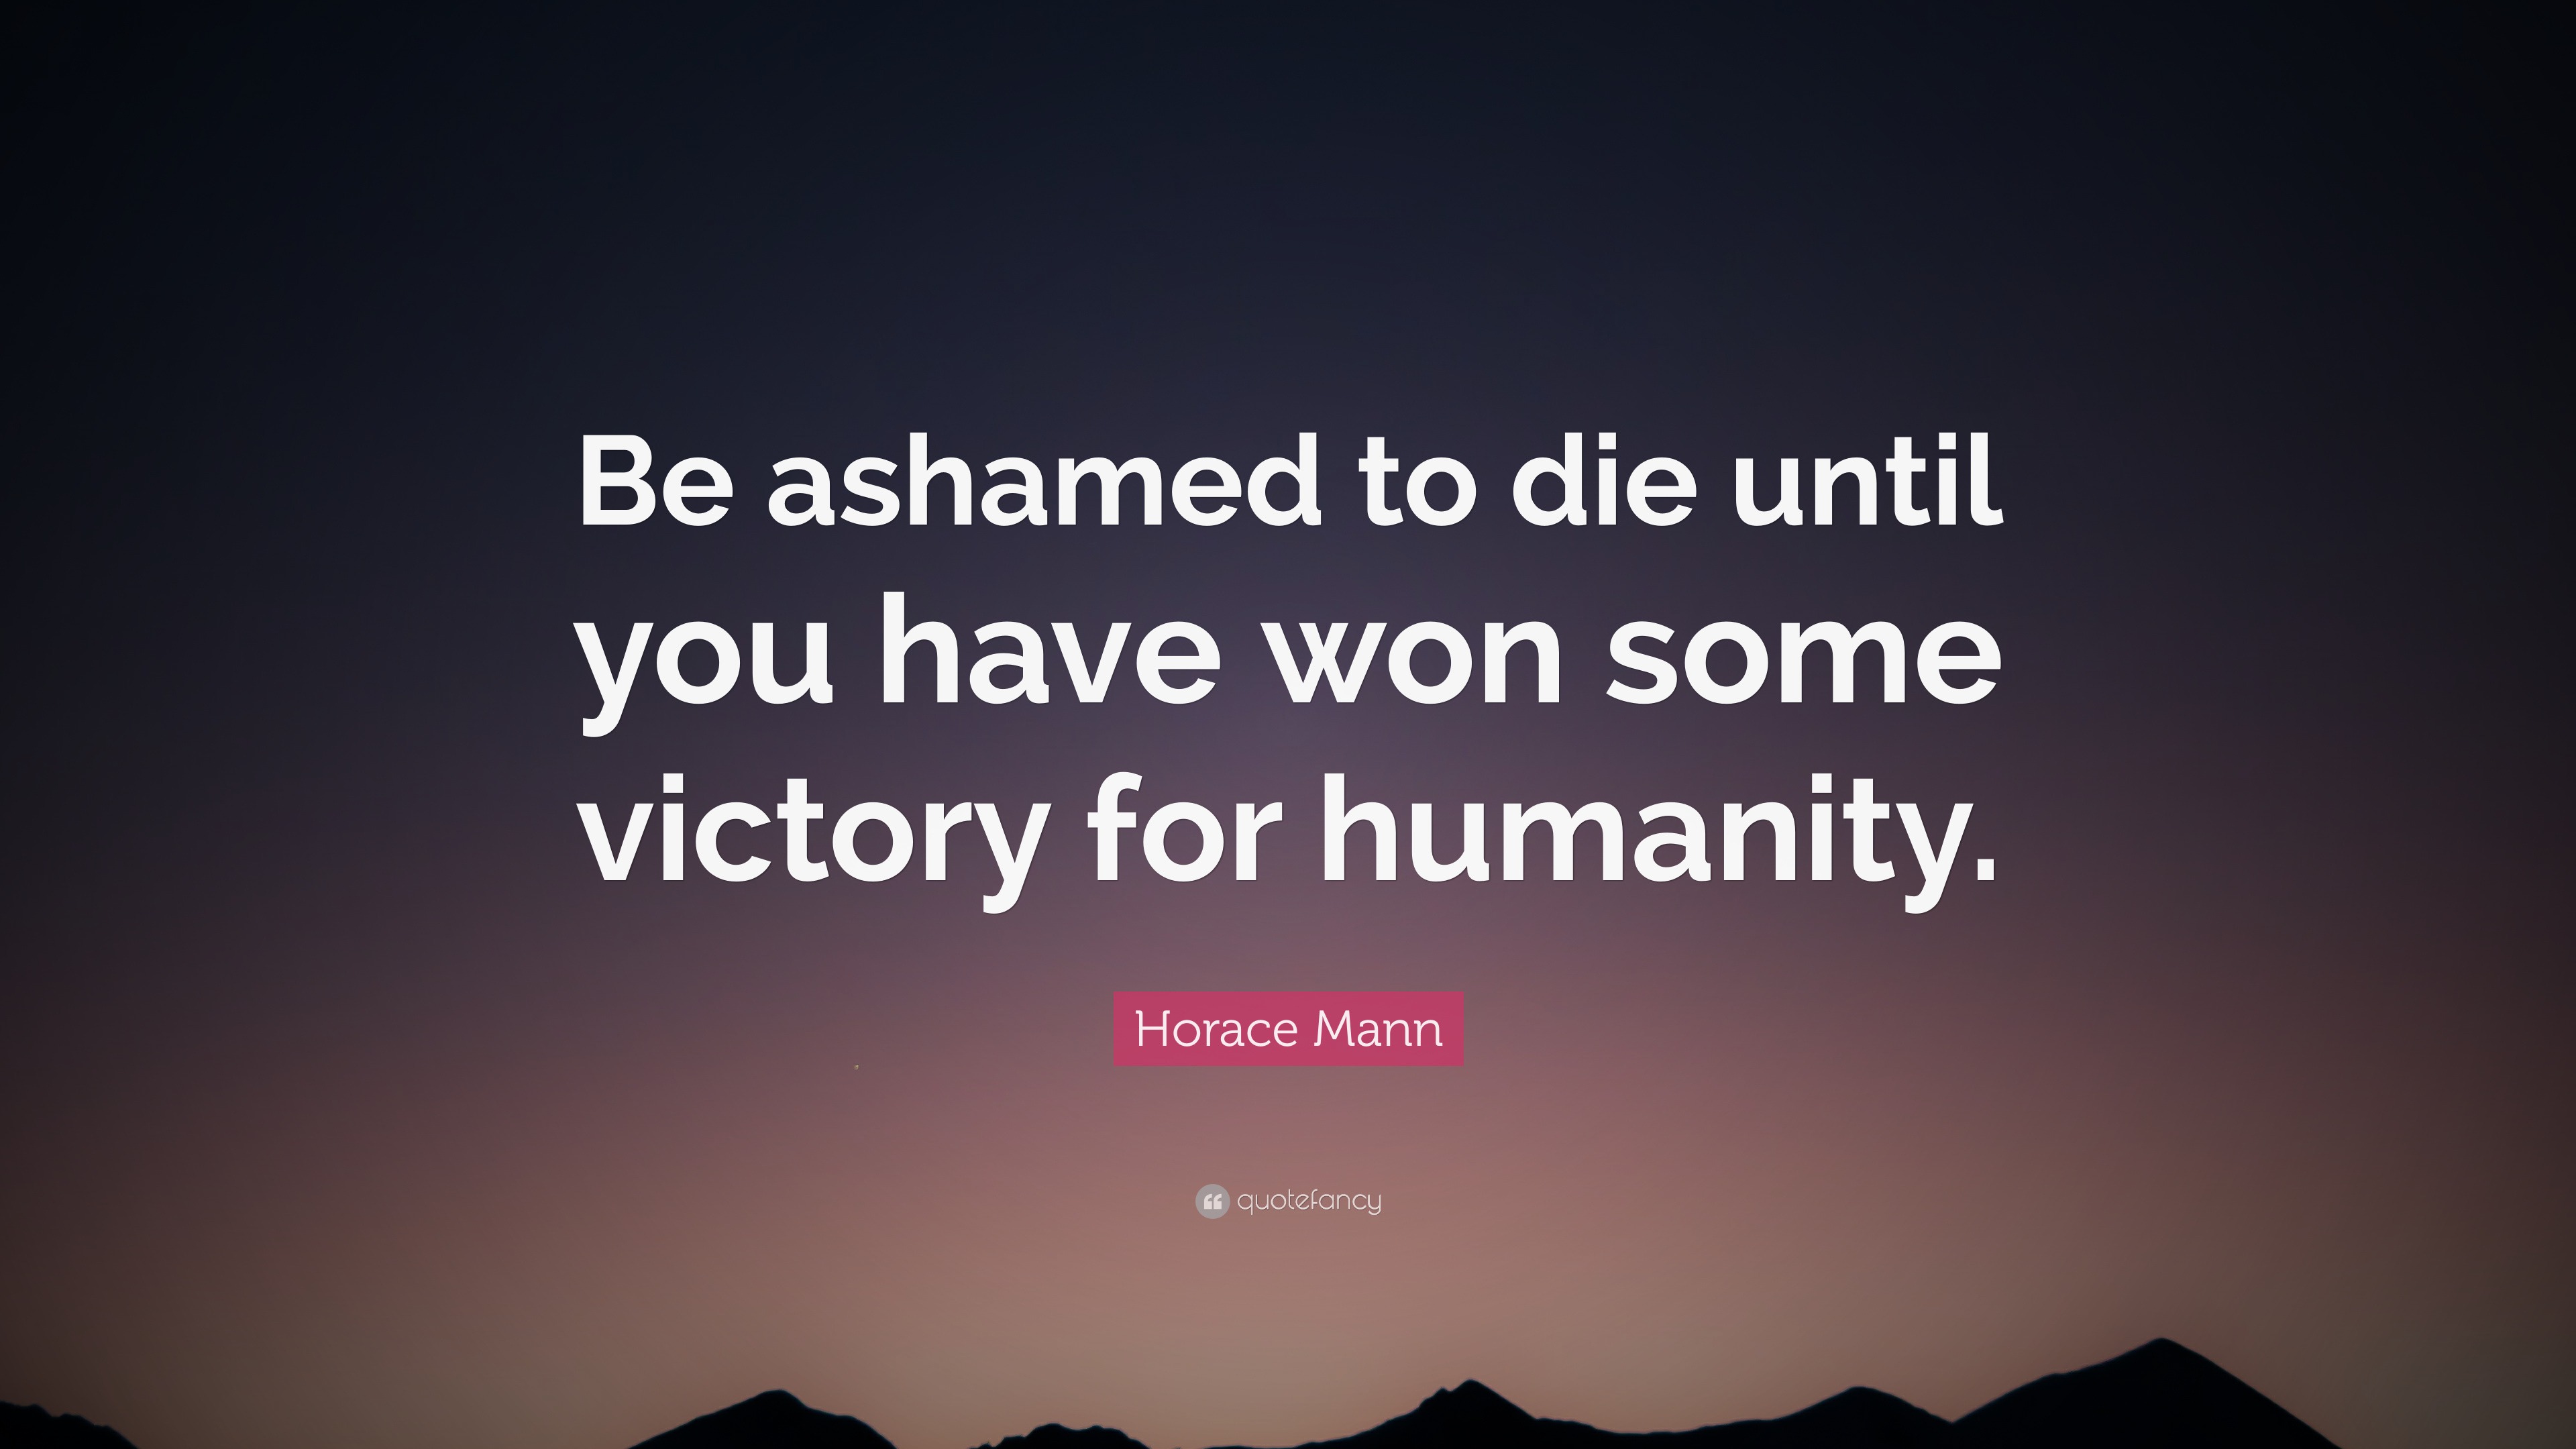 Horace Mann Quote: “Be ashamed to die until you have won some victory